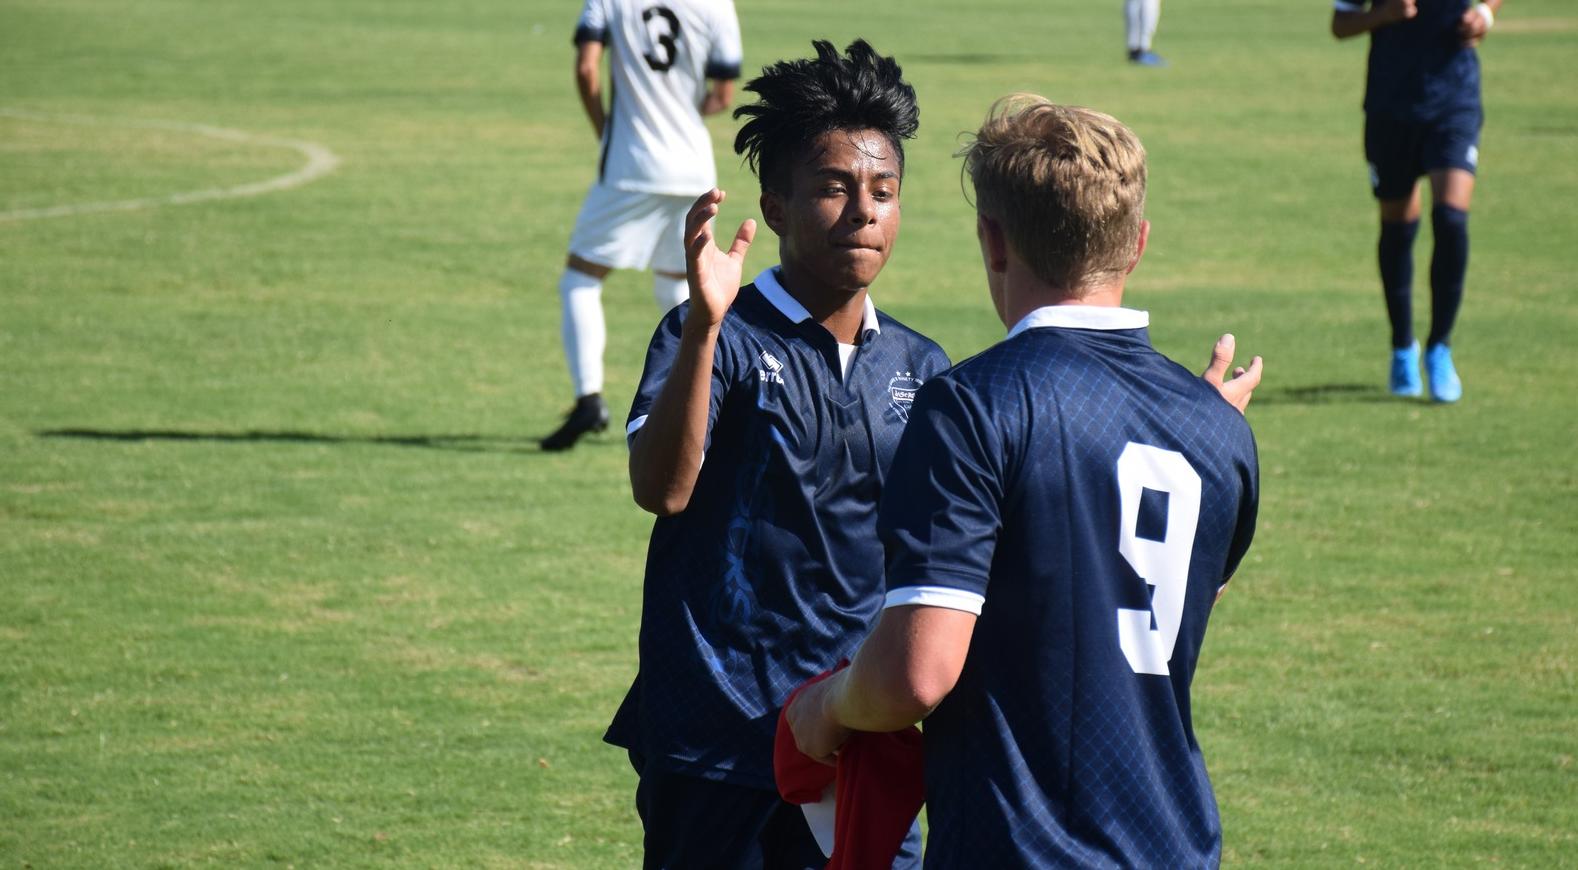 Men's soccer team tops Mesa for second straight victory